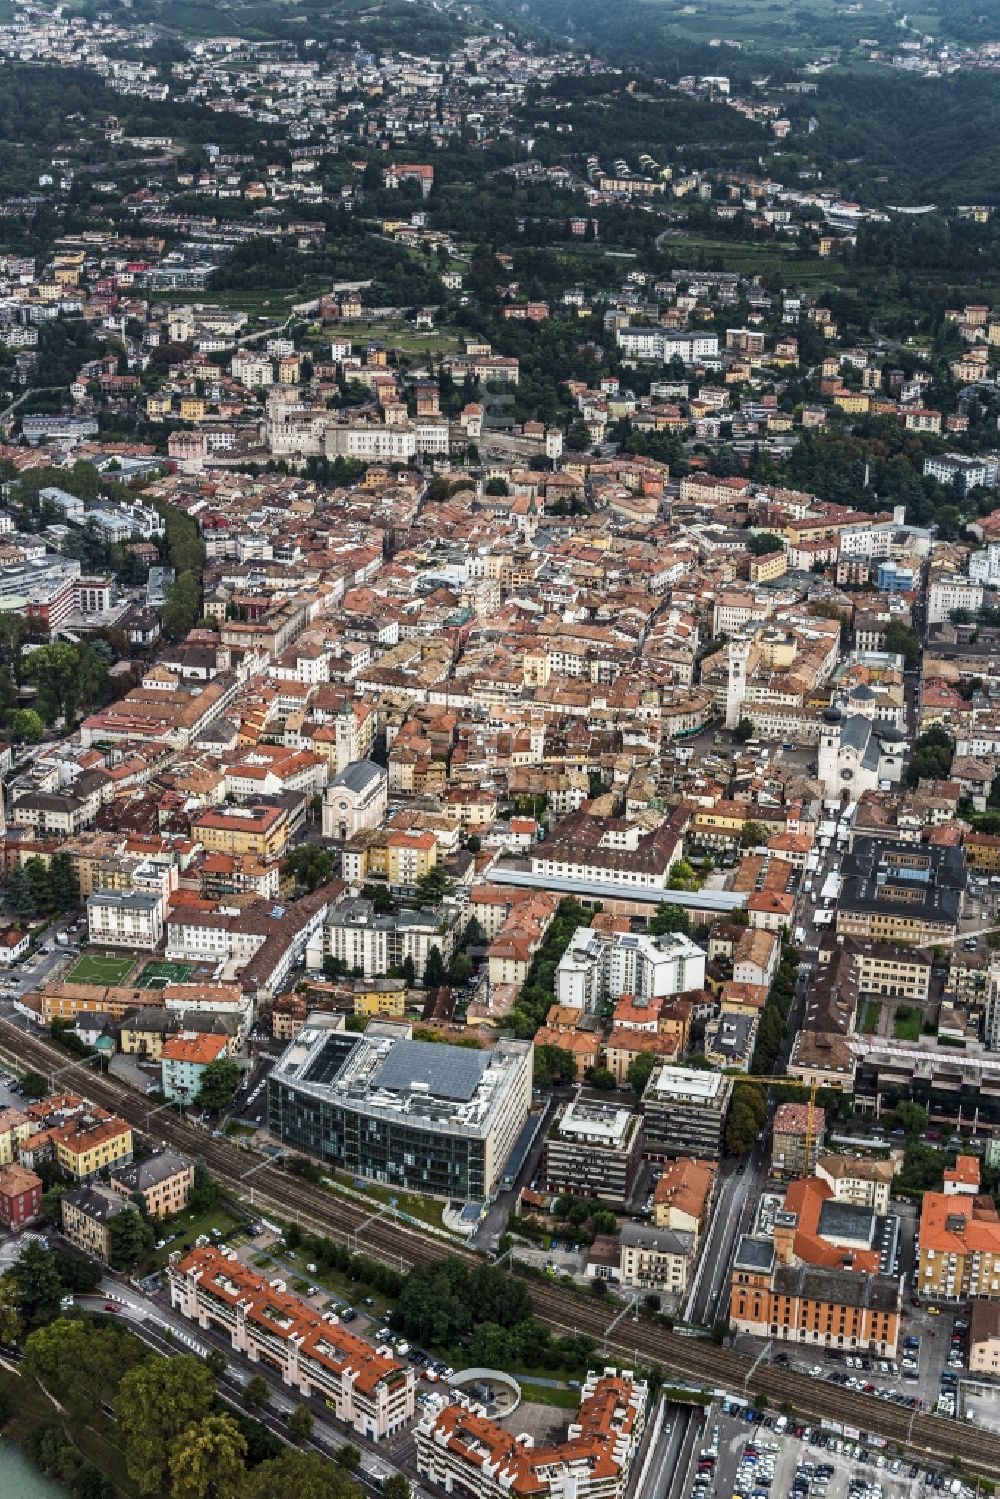 Trient from above - City center in Trento, Trentino in Italy